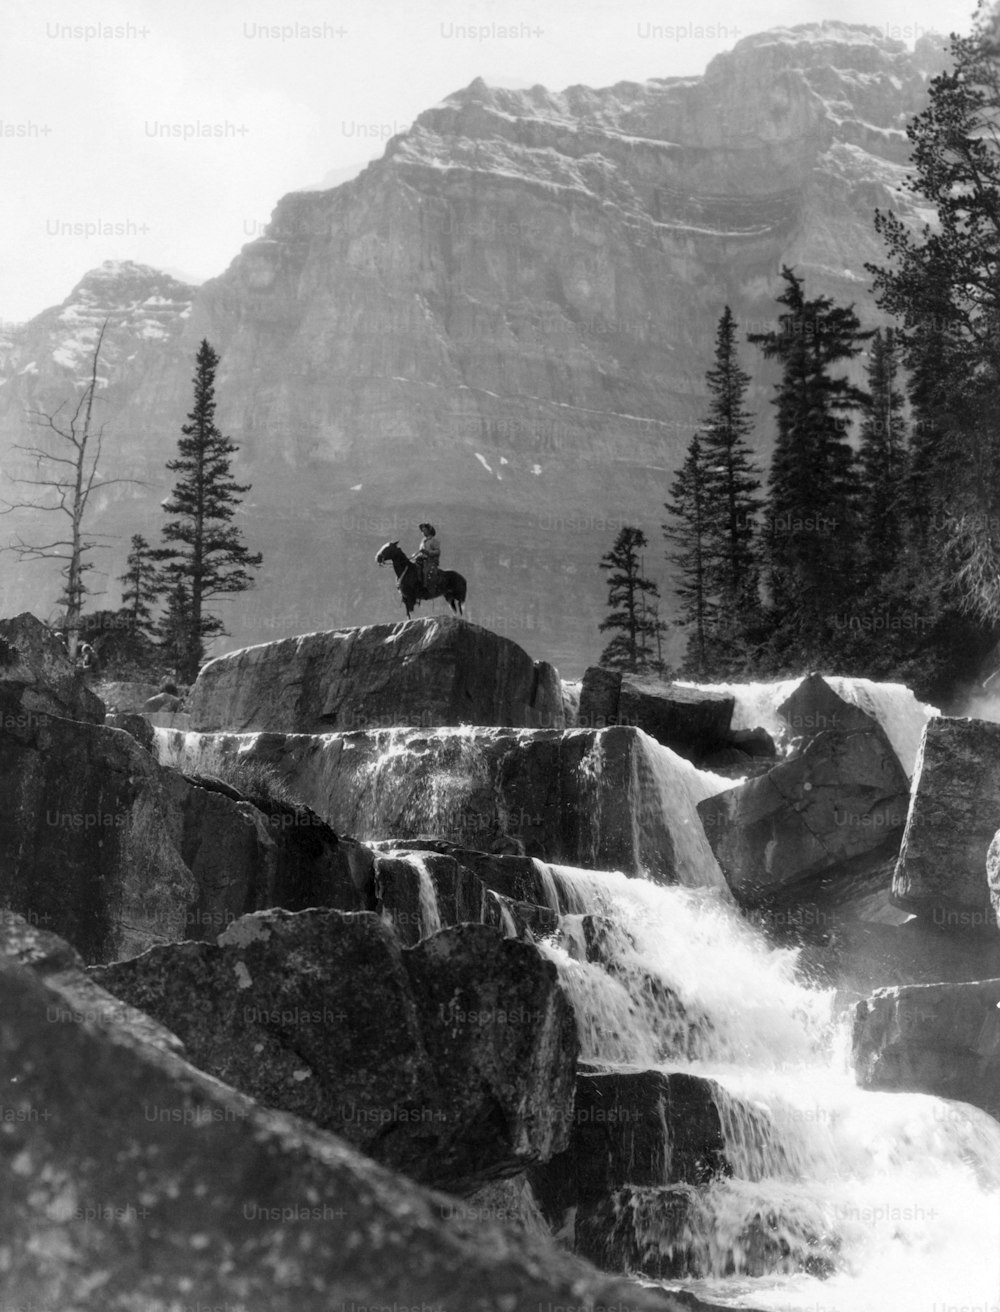 UNITED STATES - Circa 1940s:  Vertical Waterfall Man On Horse In Background Giants Steps Paradise Valley Alberta Canada Cowboy Mountains Frontier Alone Remote.